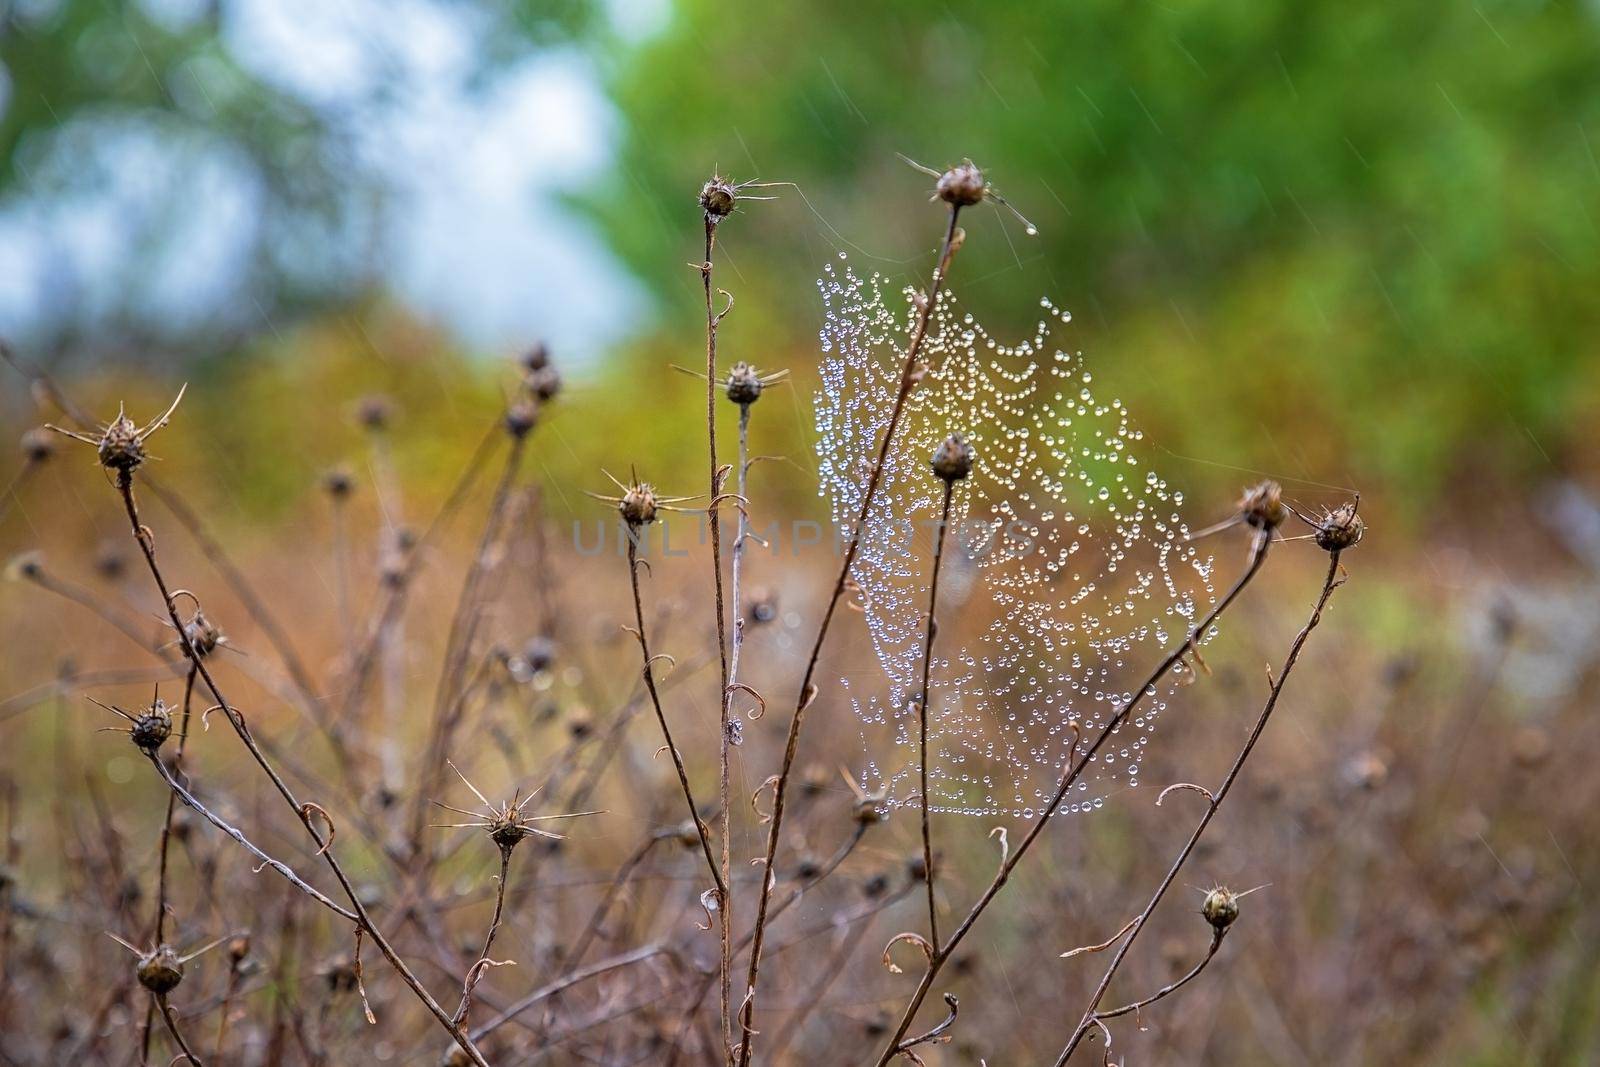 Beauty cobwebs with raindrops on a plant in the field. Weather with fog